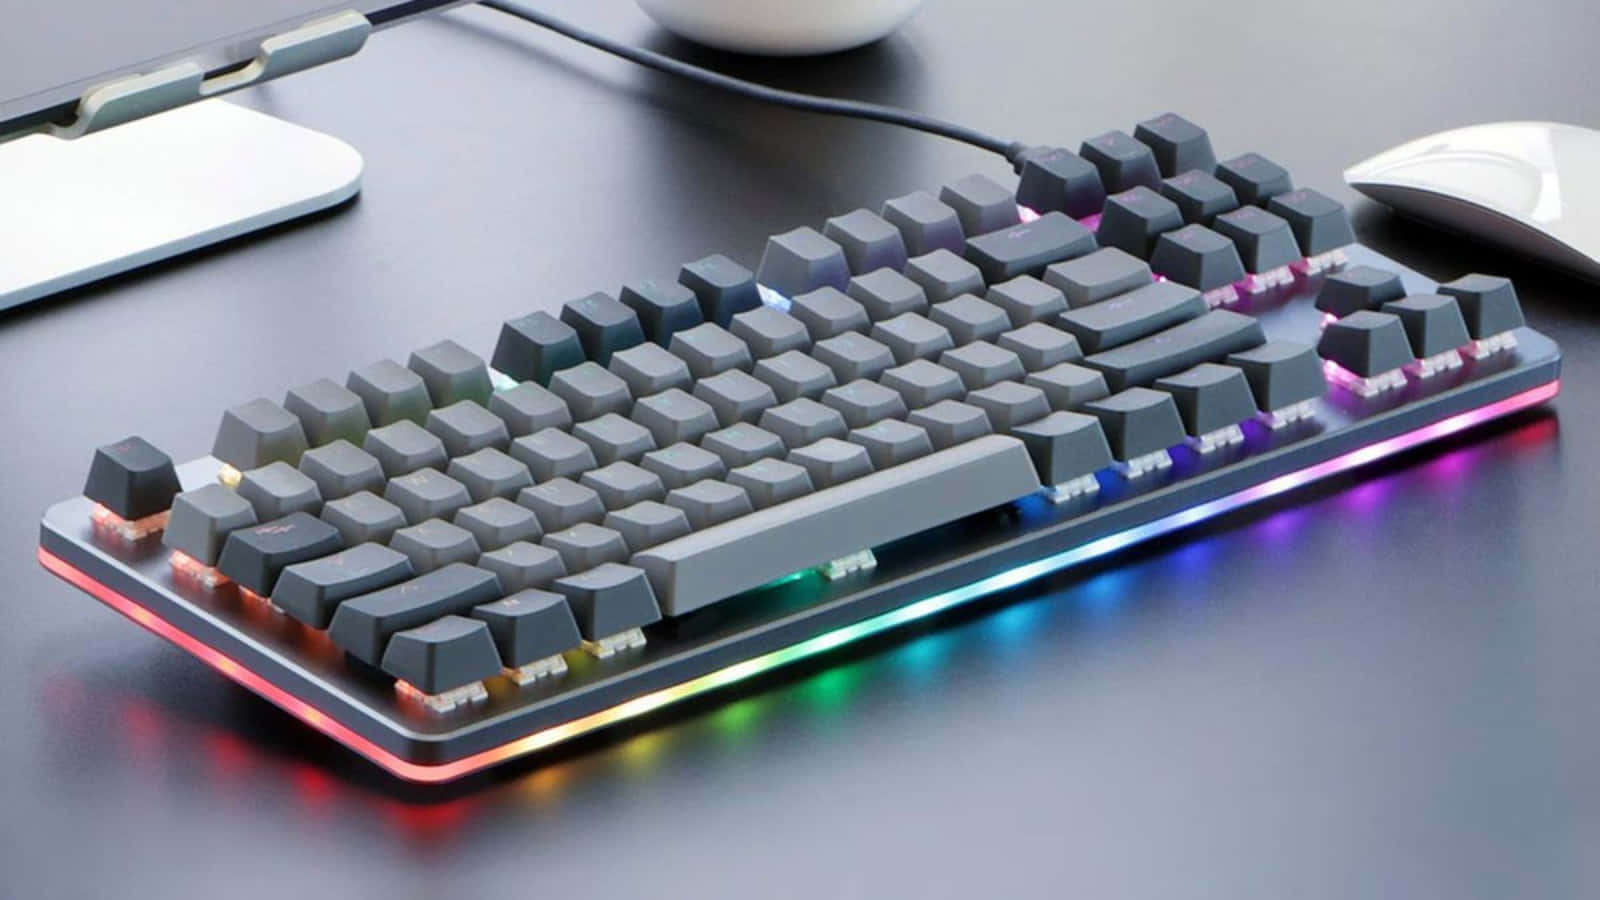 Achieve typing efficiency and accuracy with a good quality keyboard.